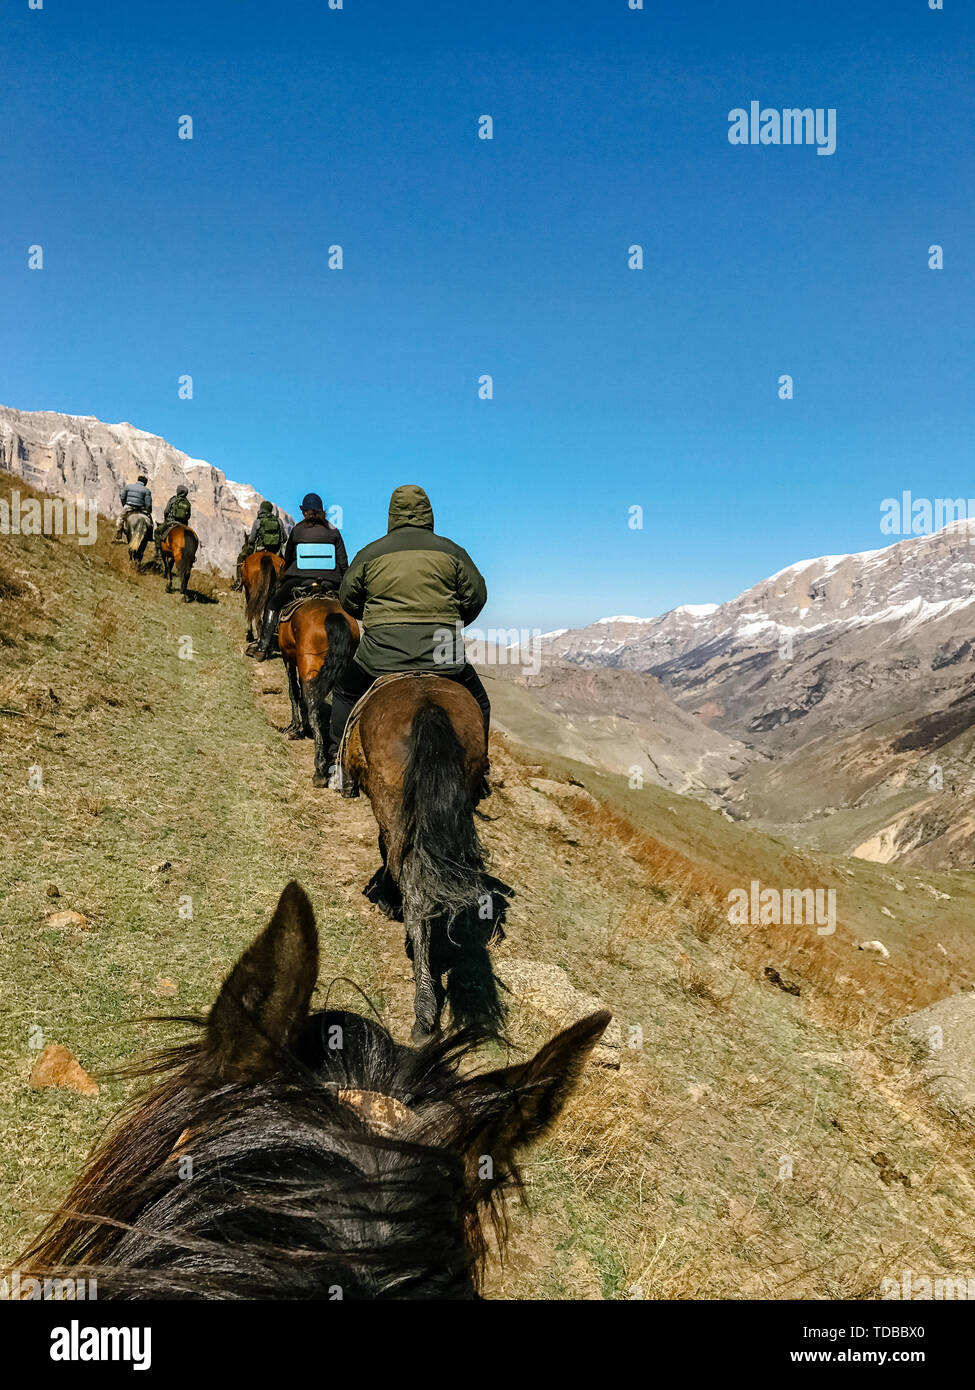 horseback view from the first person opens a review of the riders in the mountains Stock Photo